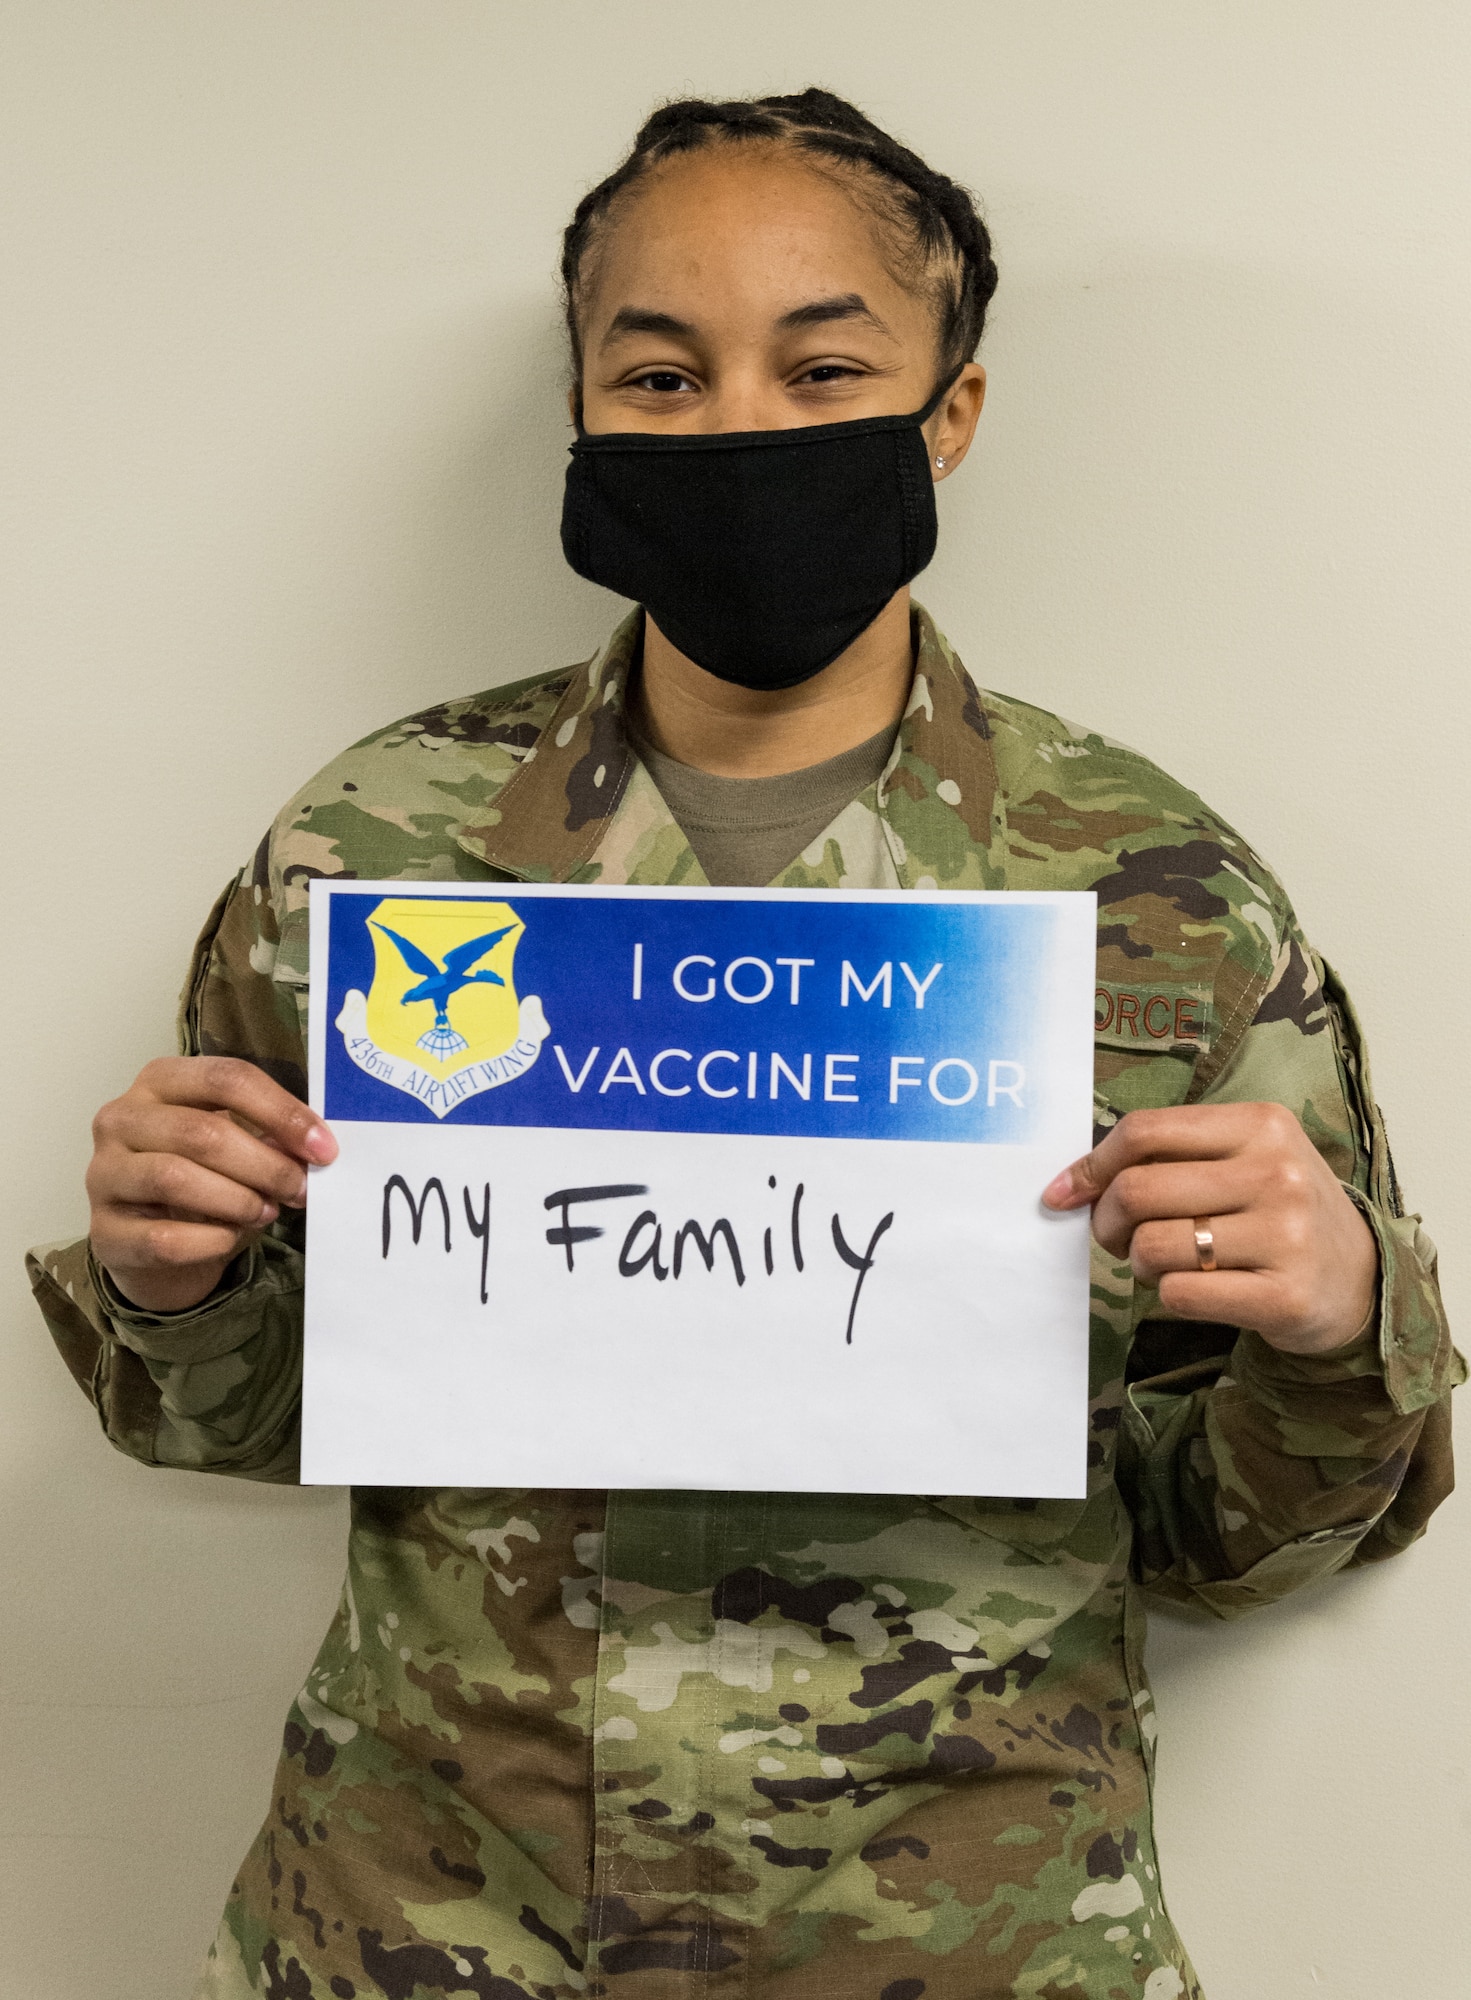 Tech. Sgt. Tiana White, 436th Airlift Wing Tactics and Leadership Nexus cadre, displays a sign stating why she volunteered for the COVID-19 vaccine Jan. 22, 2021, at Dover Air Force Base, Delaware. White was among the first Team Dover members who voluntarily received the vaccine in accordance with Department of Defense guidance. The vaccine was granted emergency use authorization by the U.S. Food and Drug Administration for use in prevention of COVID-19. (U.S. Air Force photo by Roland Balik)